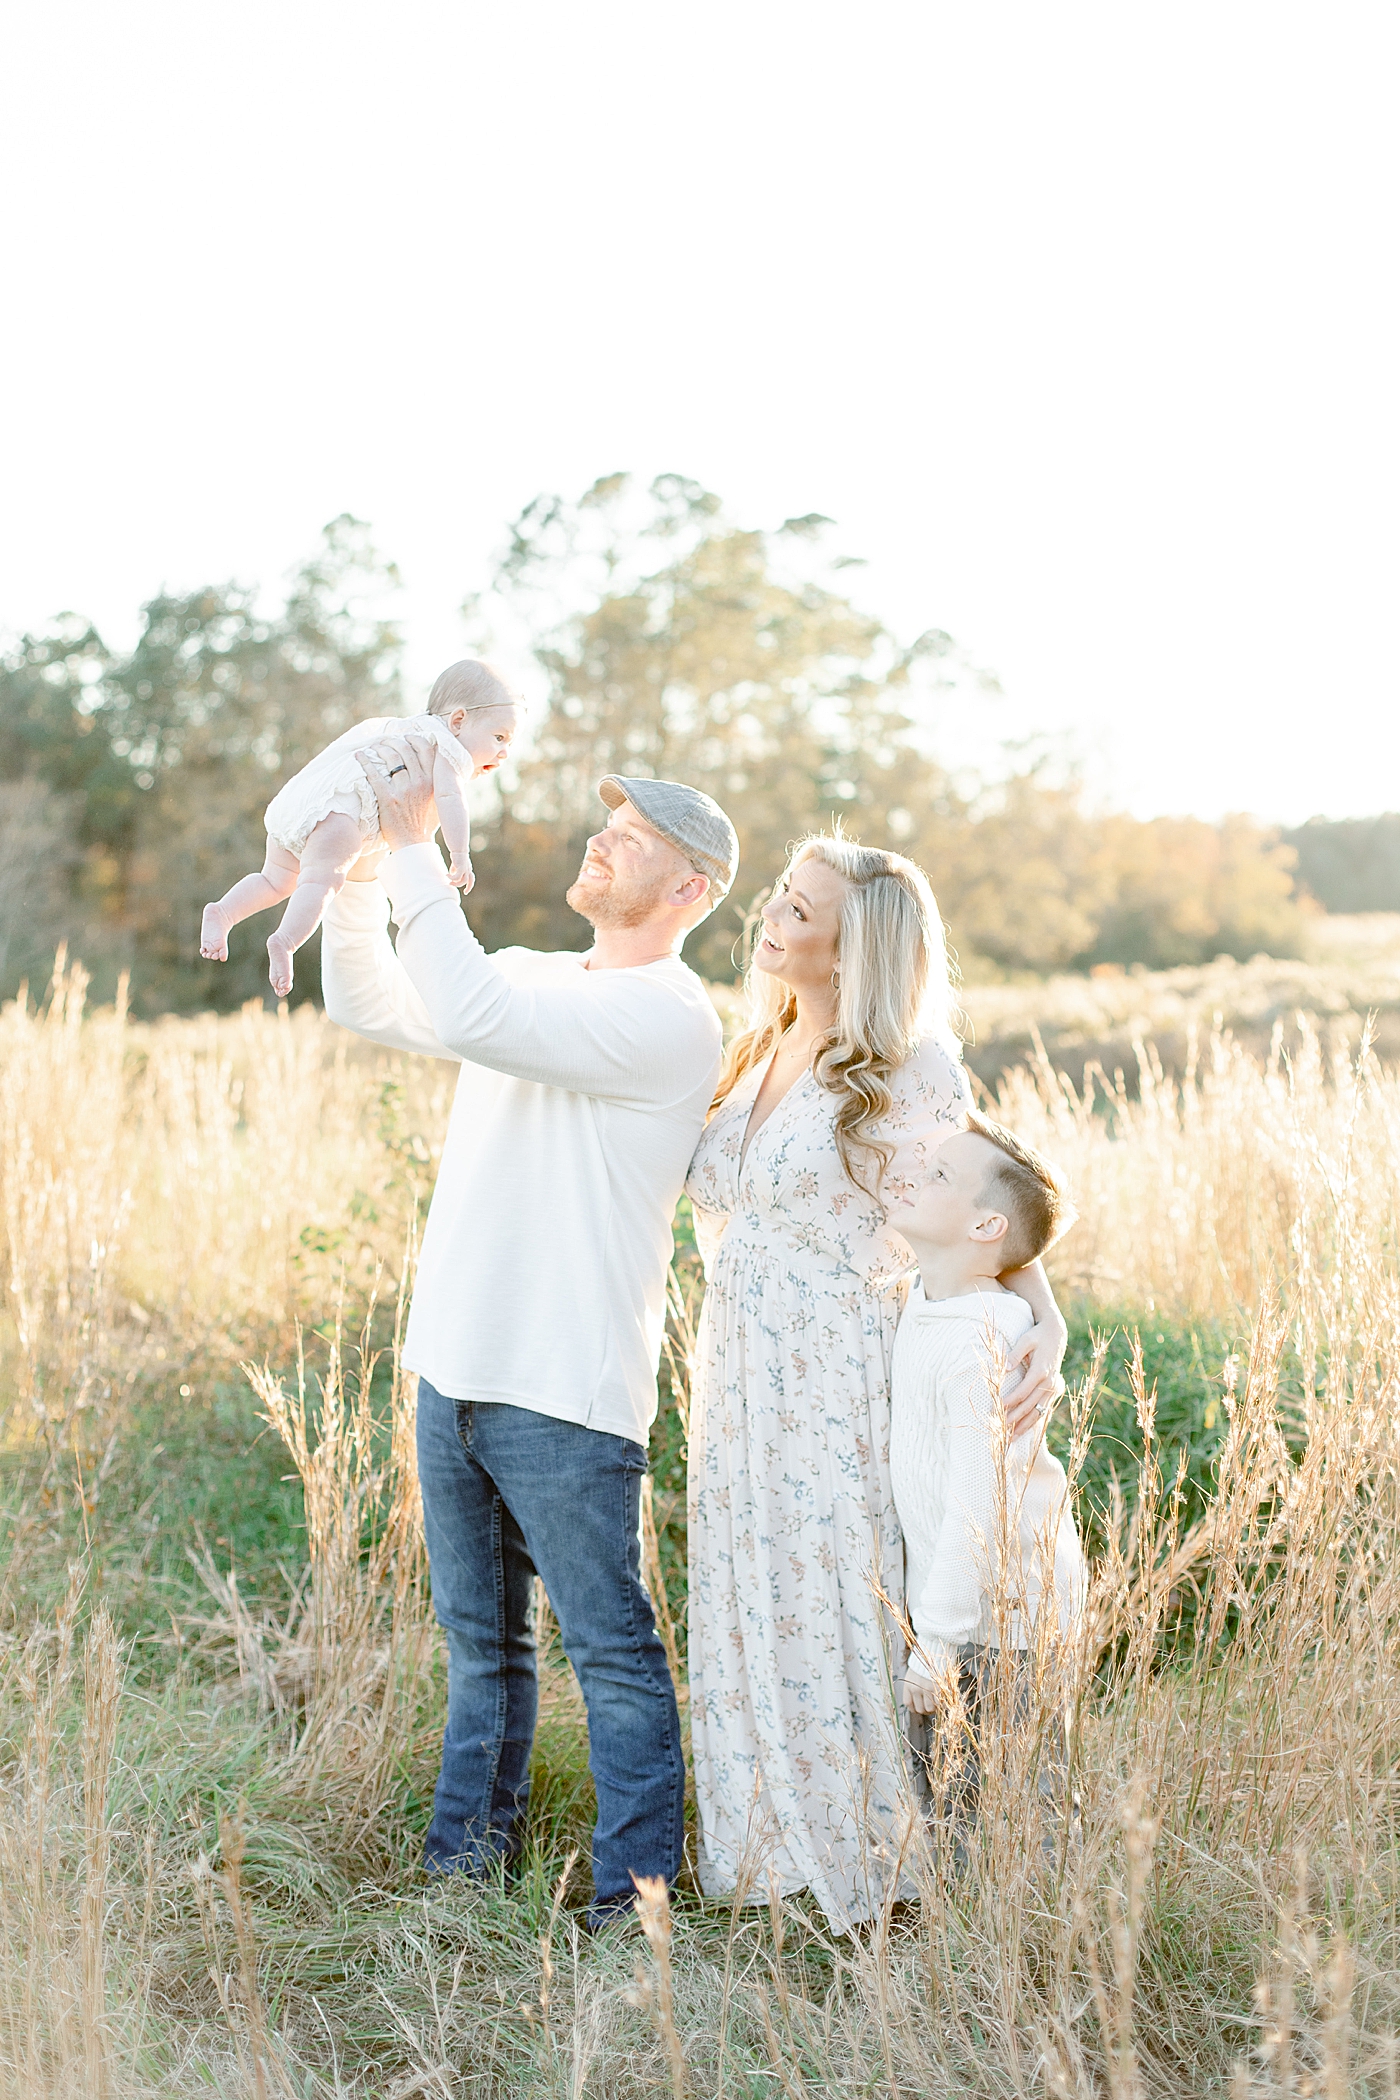 Family of four in a field | Photo by Gulfport baby photographer Little Sunshine Photography